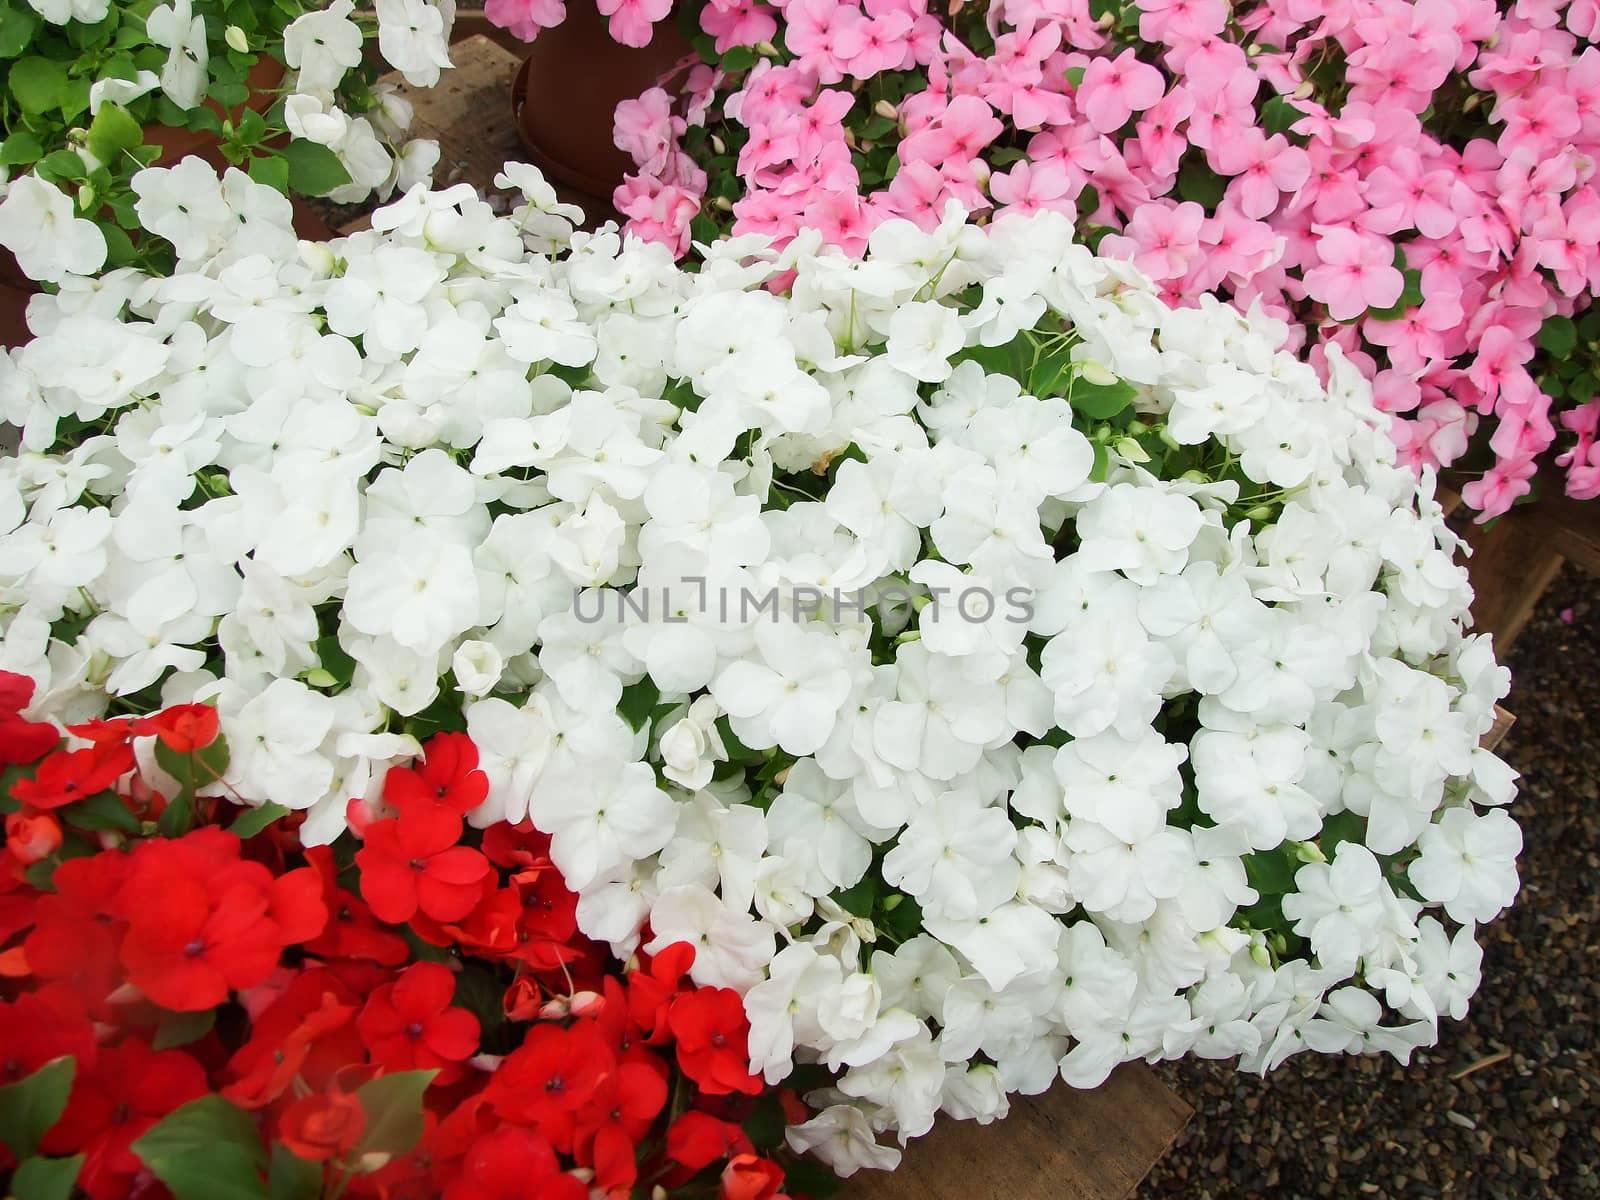 pink, red, white impatiens, scientific name Impatiens walleriana by yuiyuize